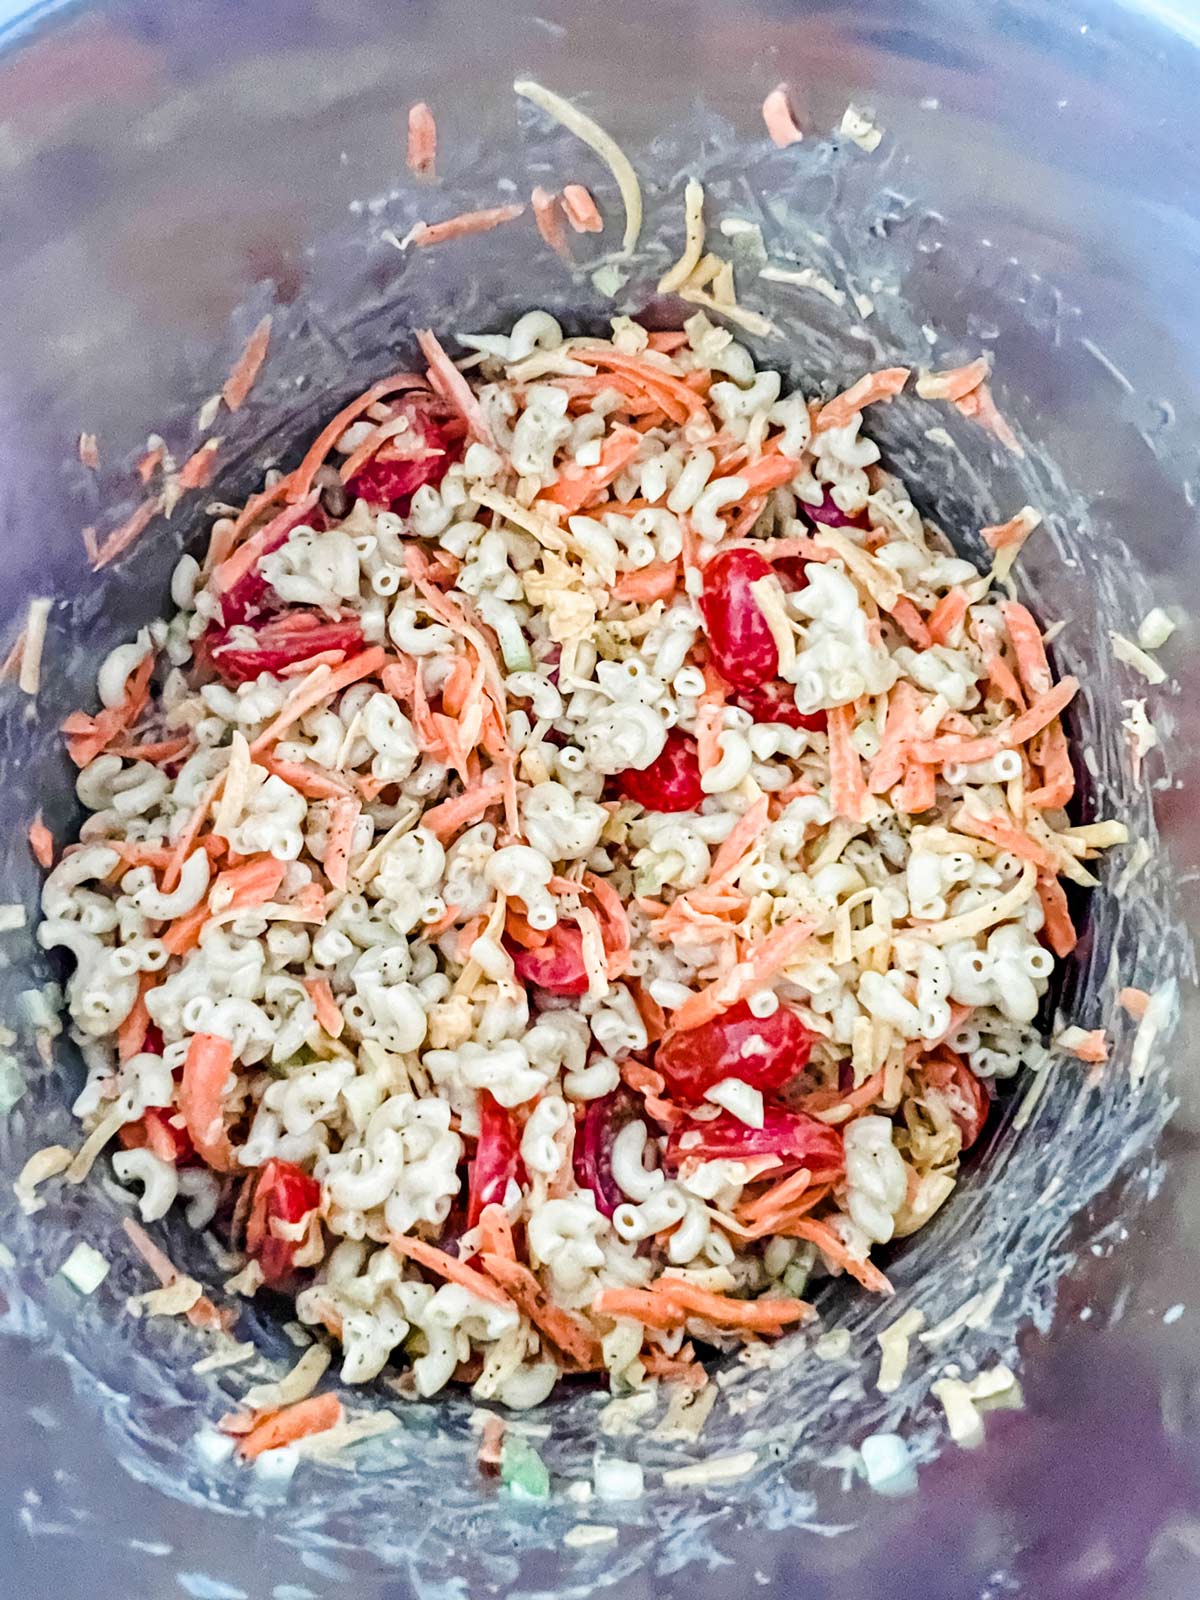 Instant pot macaroni salad in the inner pot of an Instant Pot.